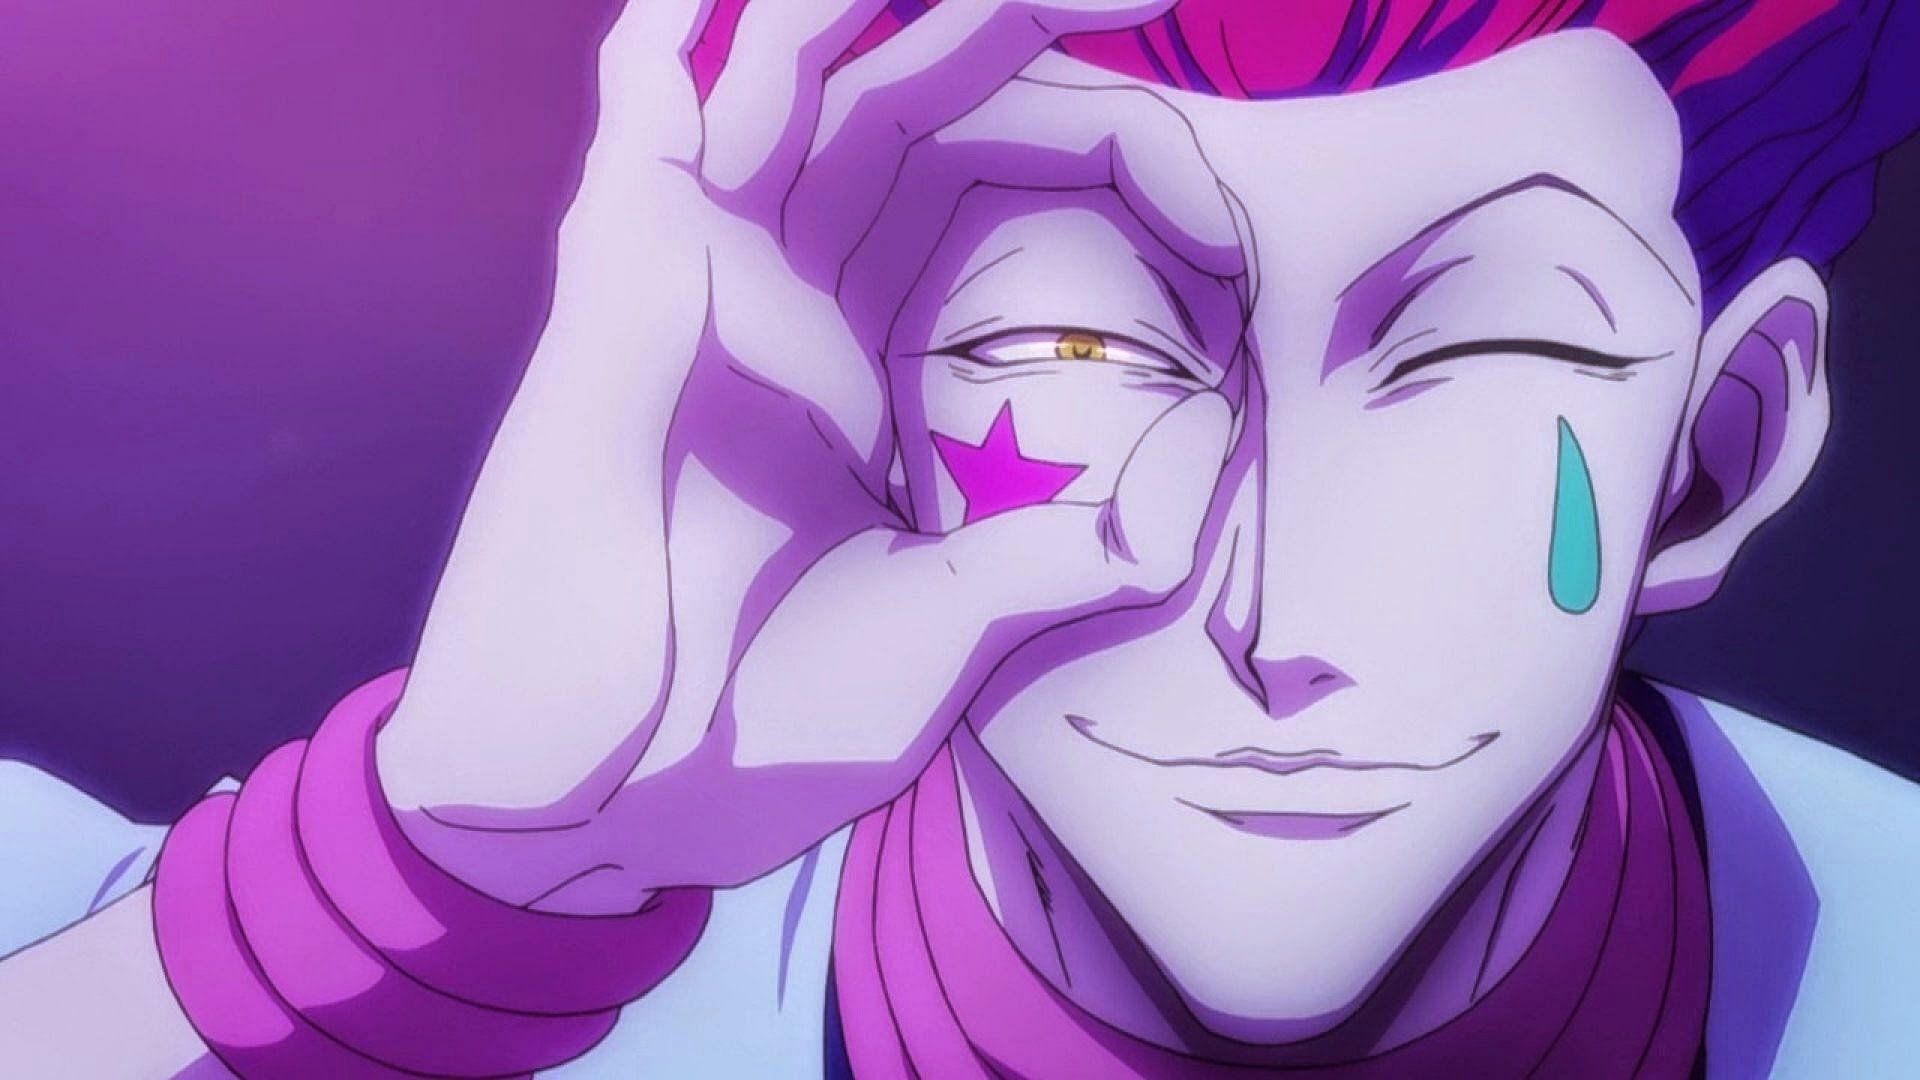 Hisoka will be a vital part of the story moving forward (Image via Studio Madhouse)